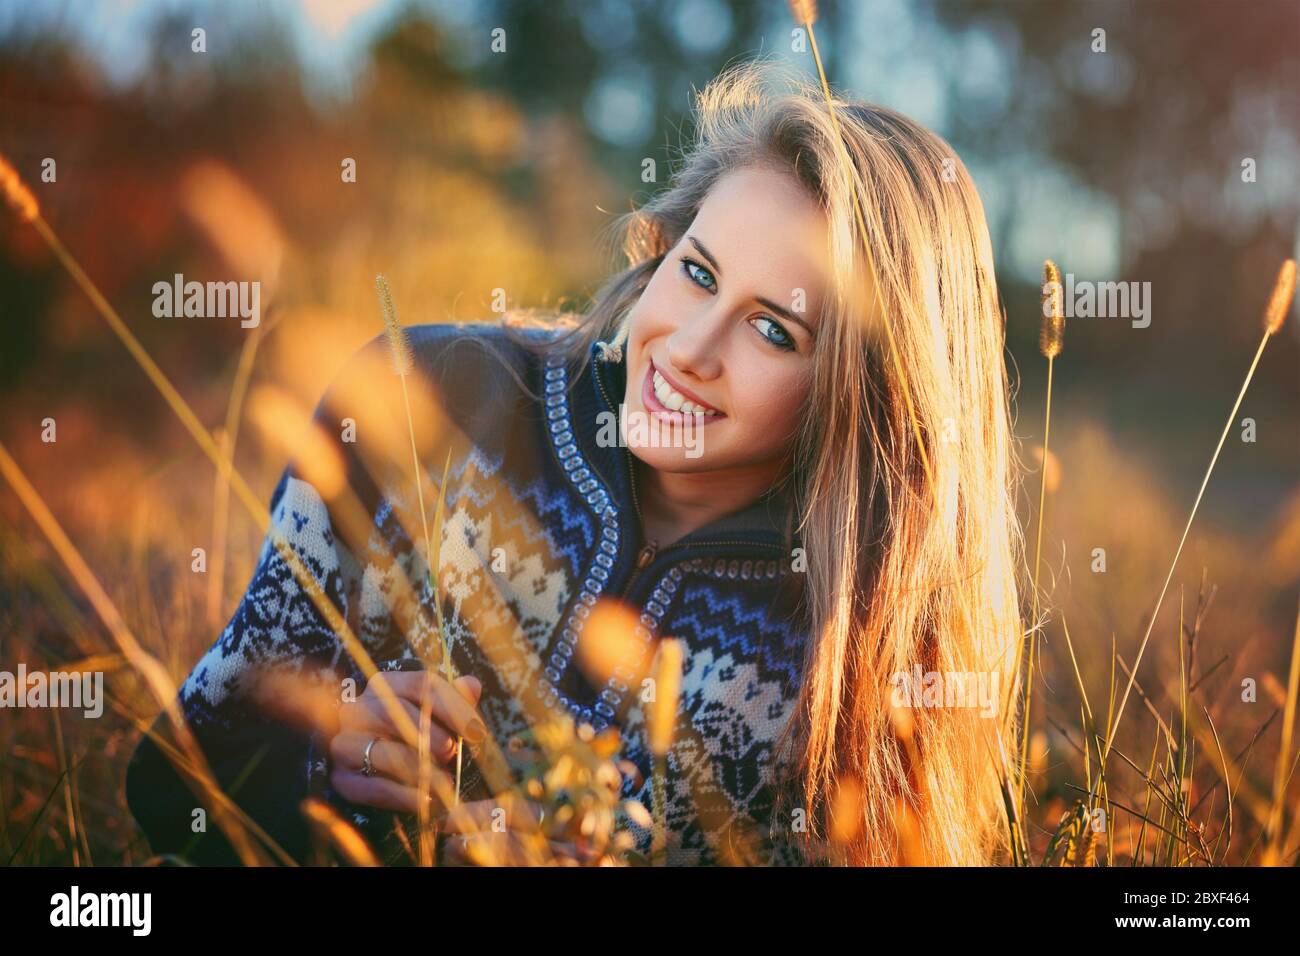 Beautiful smiling woman with blue eyes . Seasonal portrait in nature Stock Photo